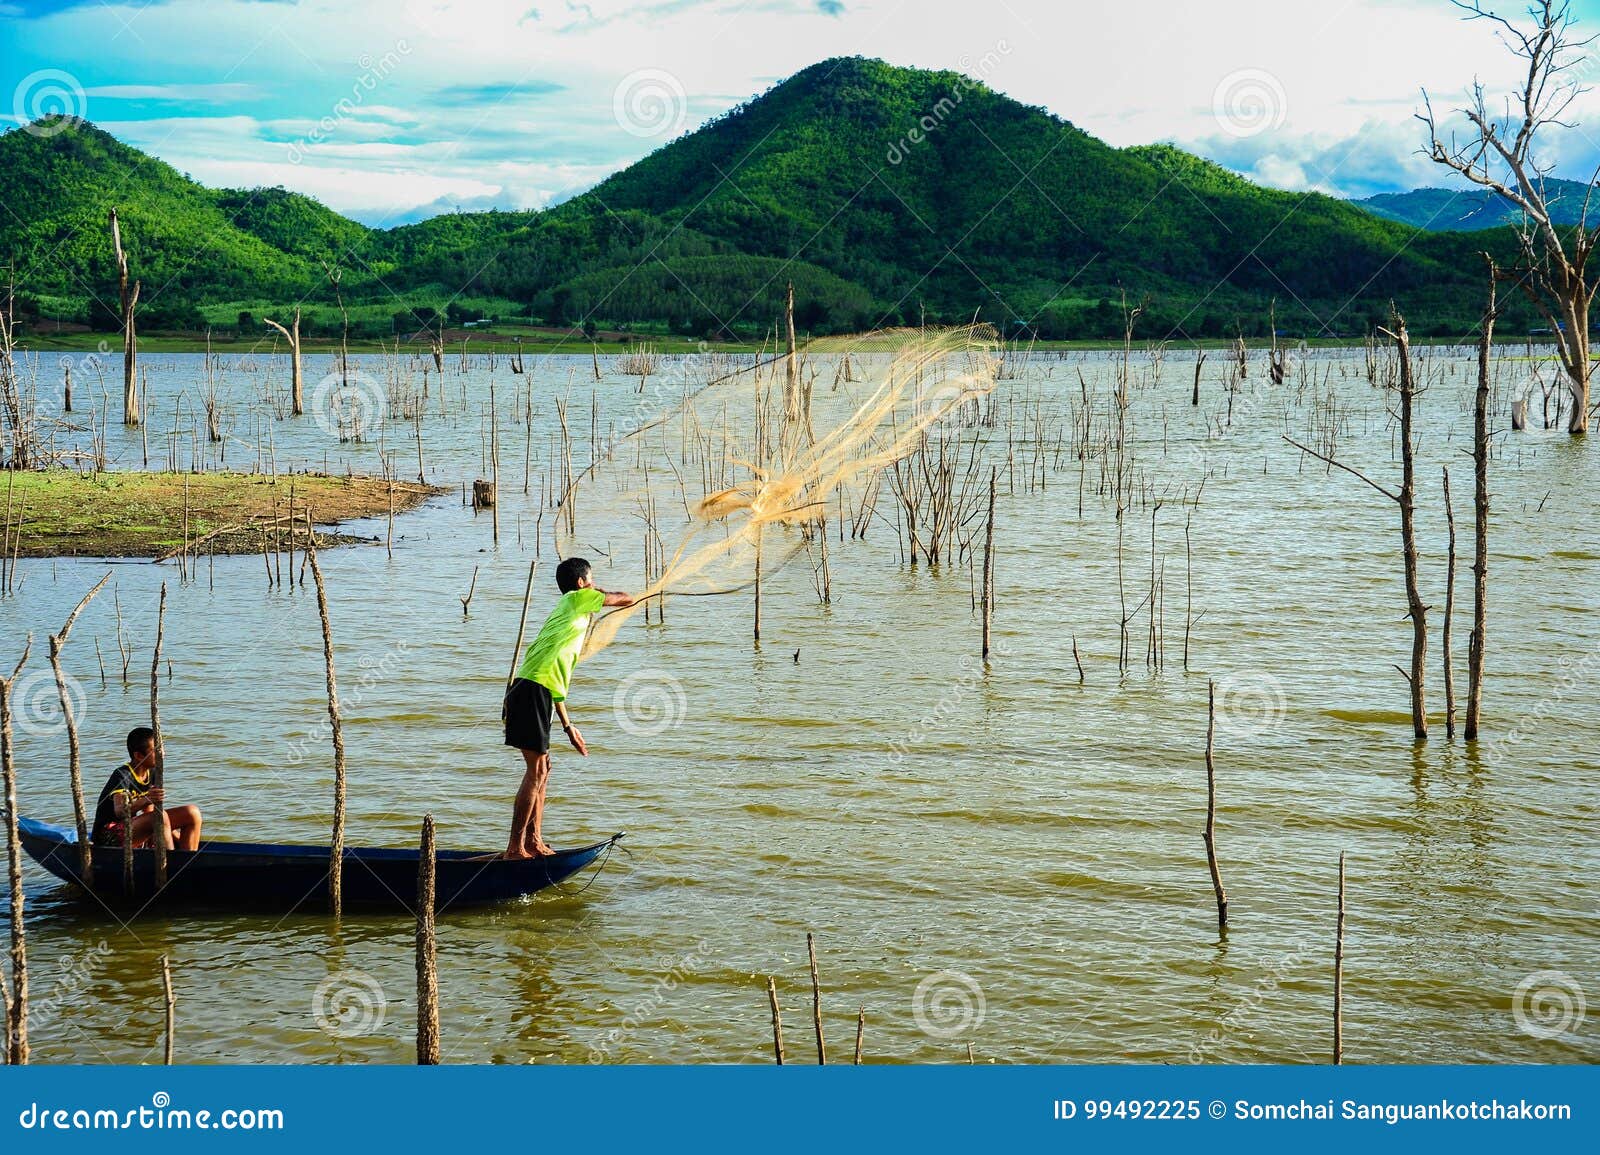 Fishermen on Boat Casting Fishing Net To Catch Fish in Swamp Editorial  Image - Image of occupation, fisherman: 99492225